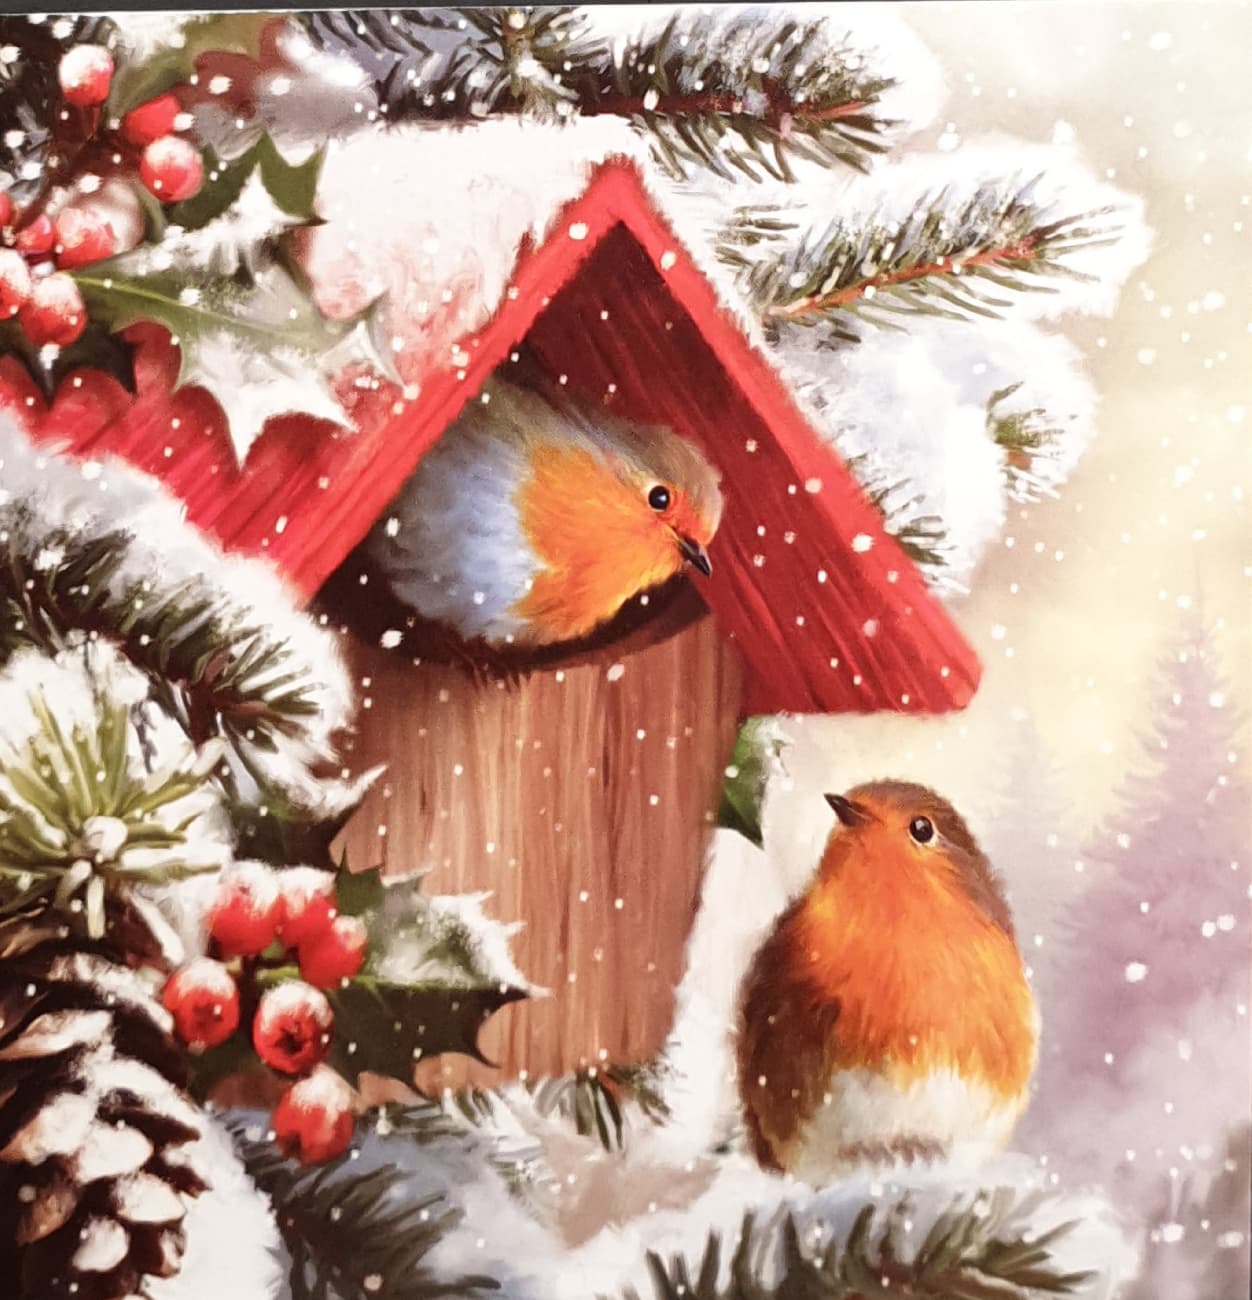 Charity Christmas Card (In Irish & English) - Pack of 8 Large Size / Cystic Fibrosis Ireland - Robins in Birdhouse